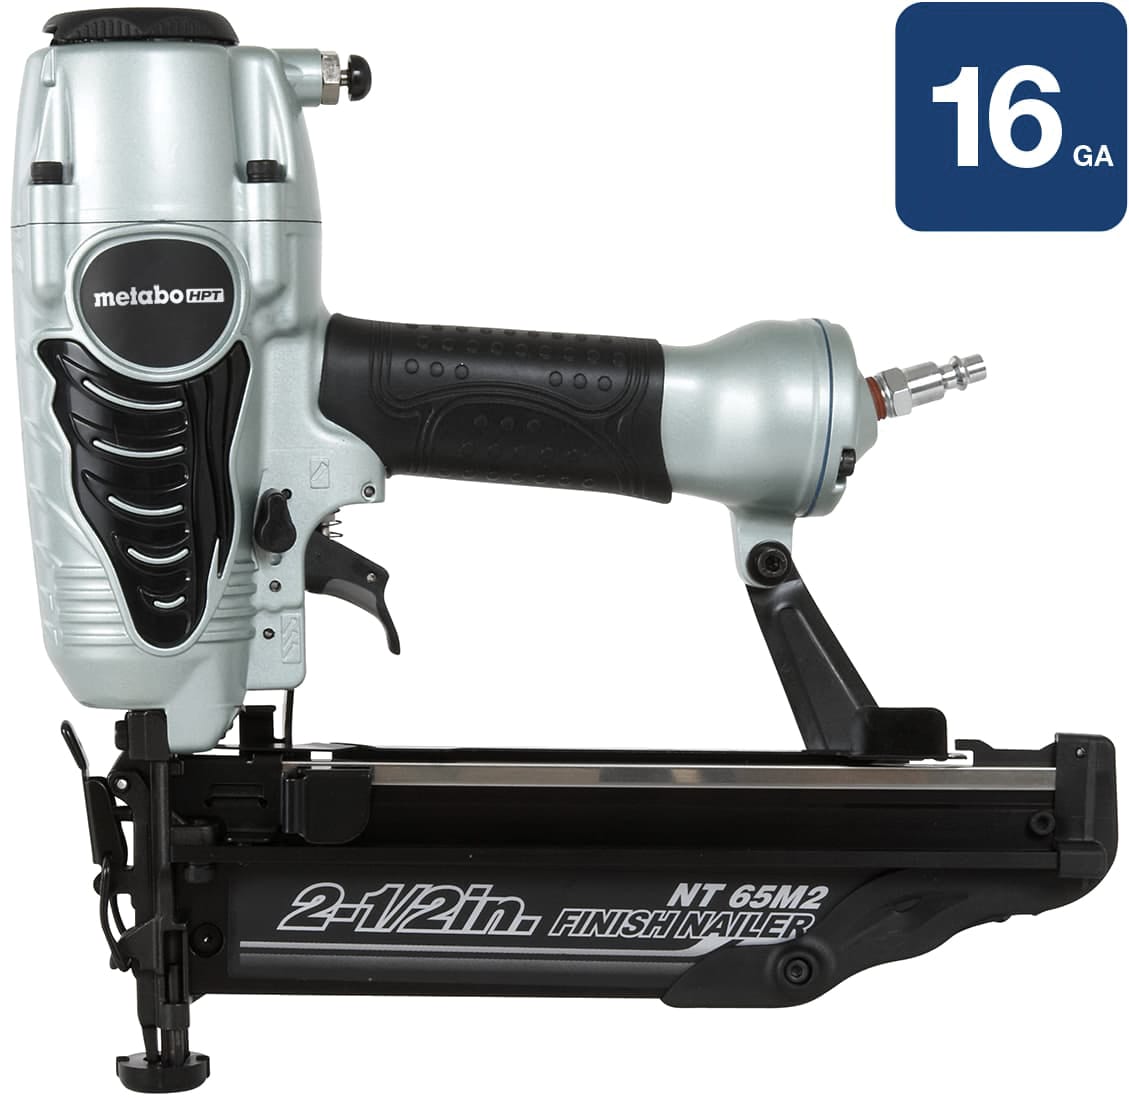 Shop Metabo HPT Finish Nailer Tool Collection at Lowes.com